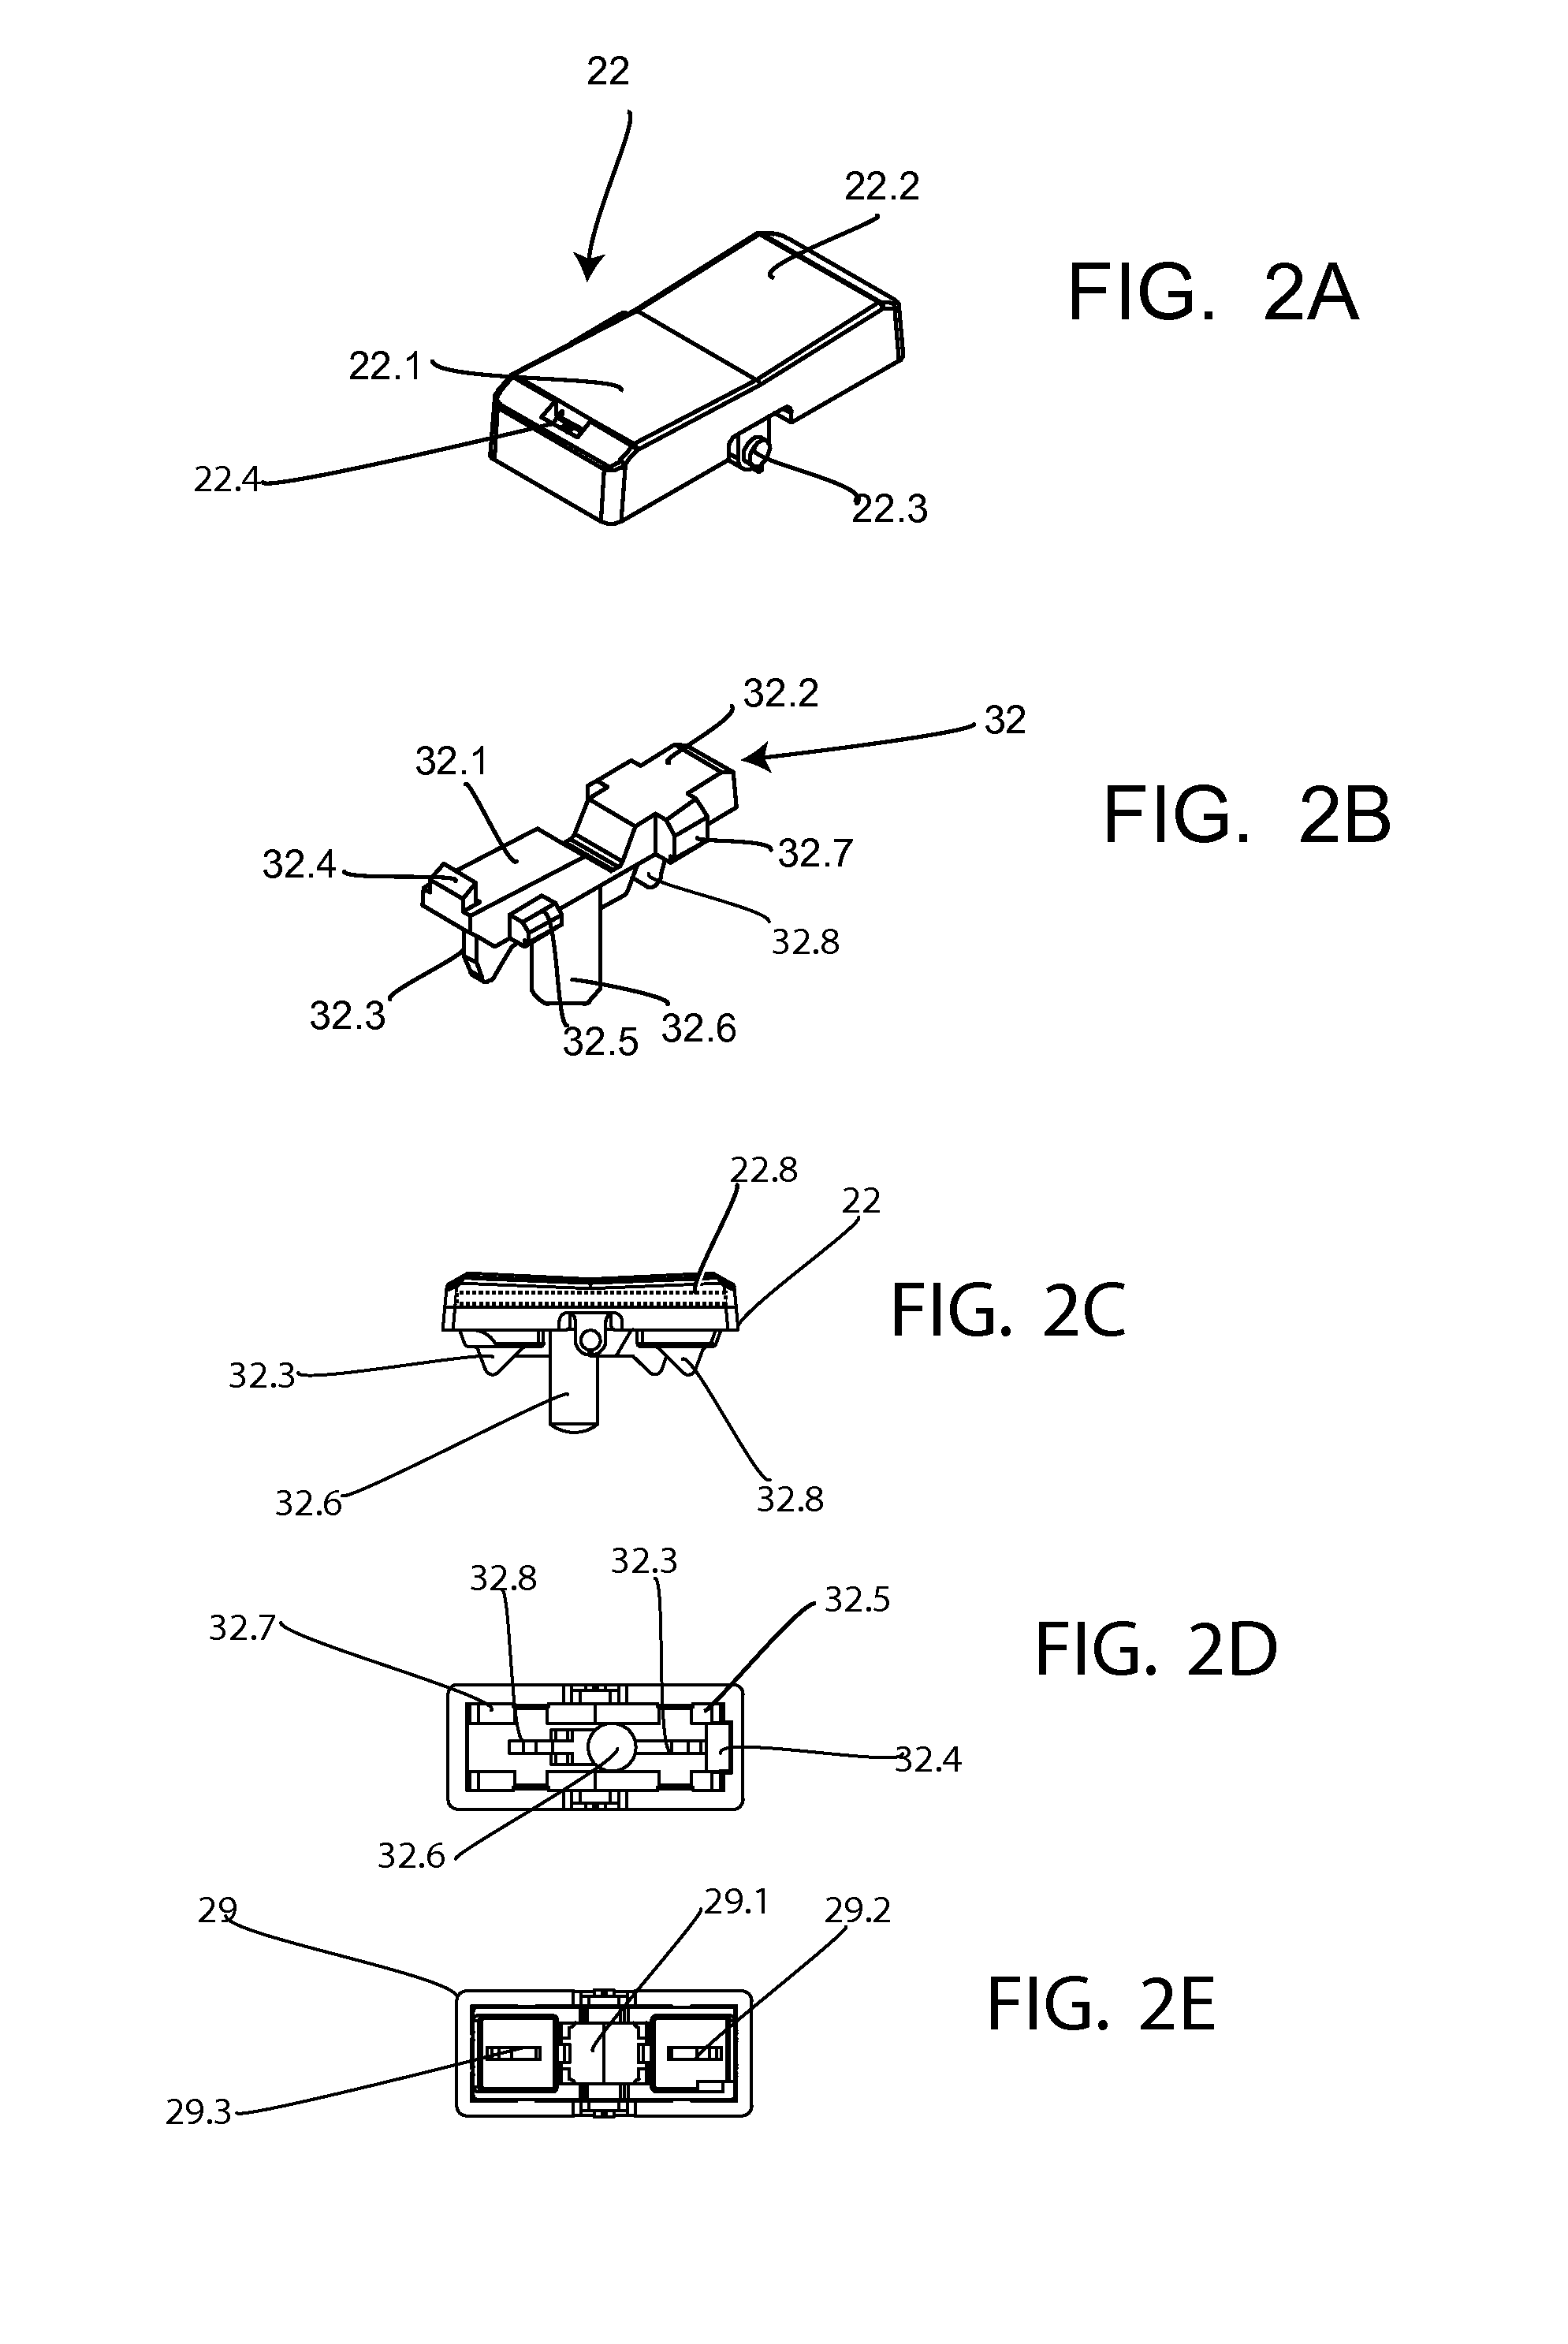 Electrical control device